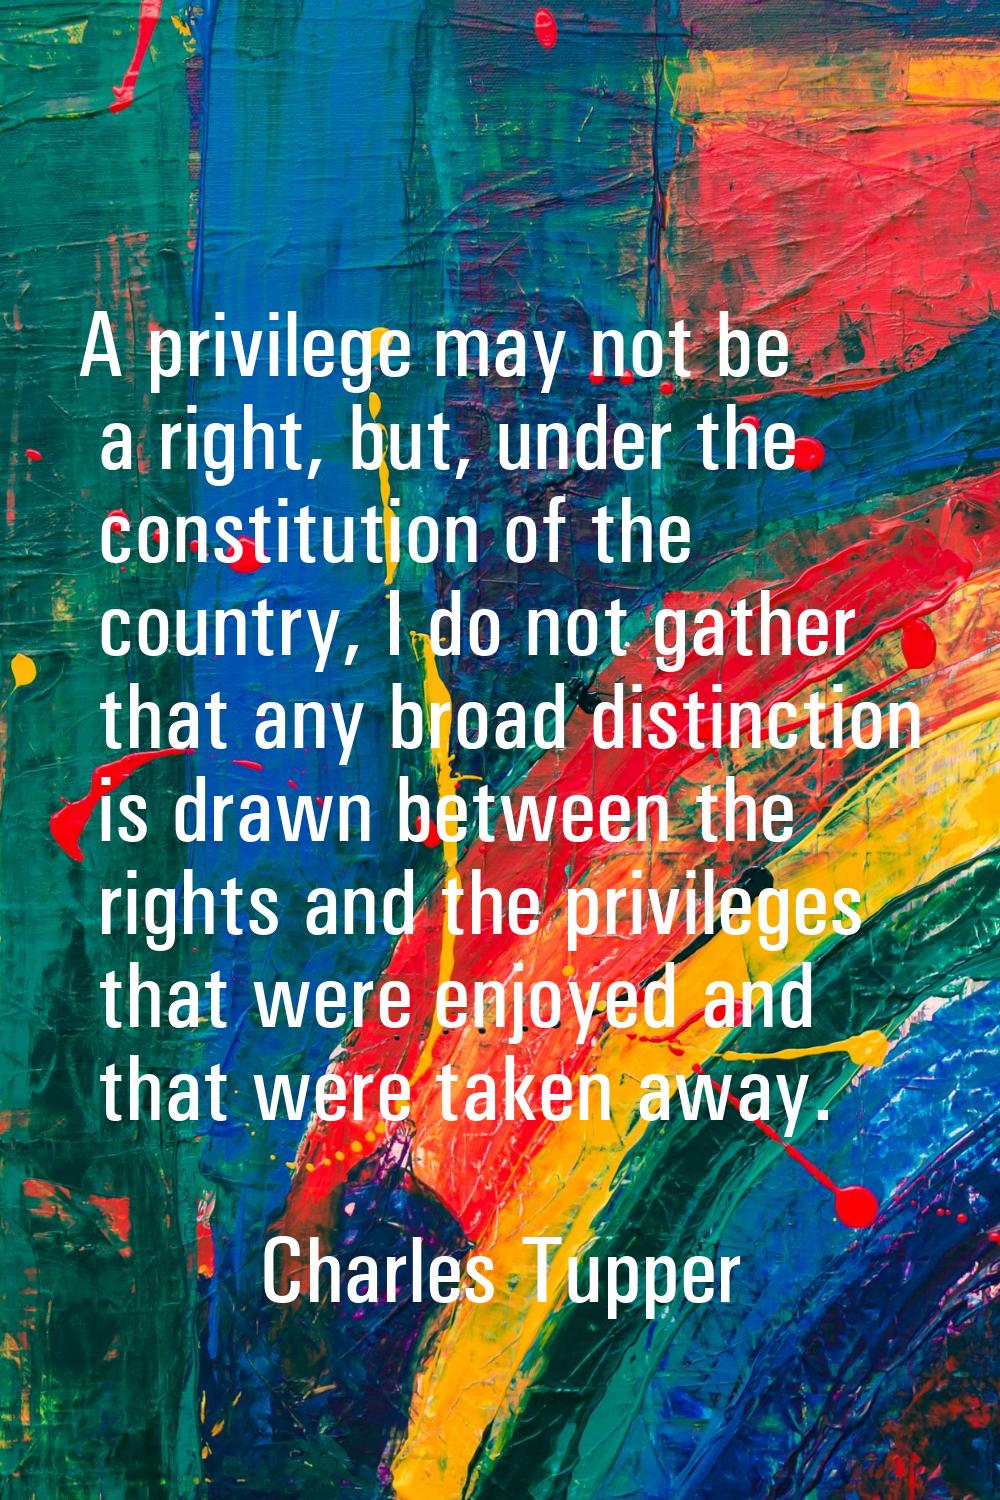 A privilege may not be a right, but, under the constitution of the country, I do not gather that an